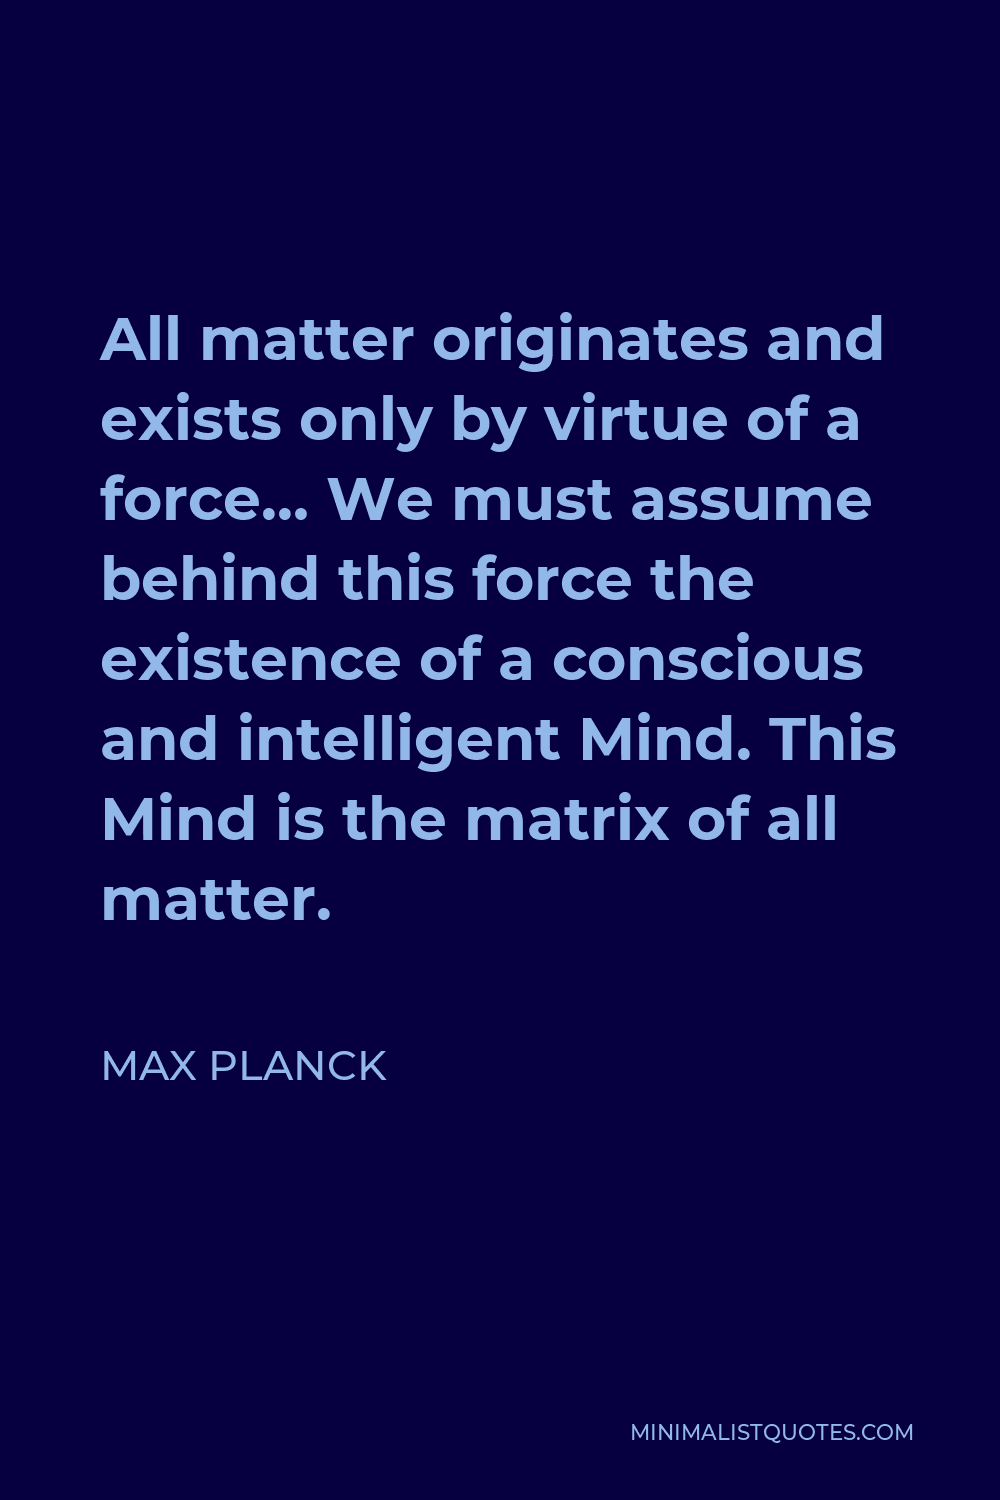 Max Planck Quote - All matter originates and exists only by virtue of a force… We must assume behind this force the existence of a conscious and intelligent Mind. This Mind is the matrix of all matter.